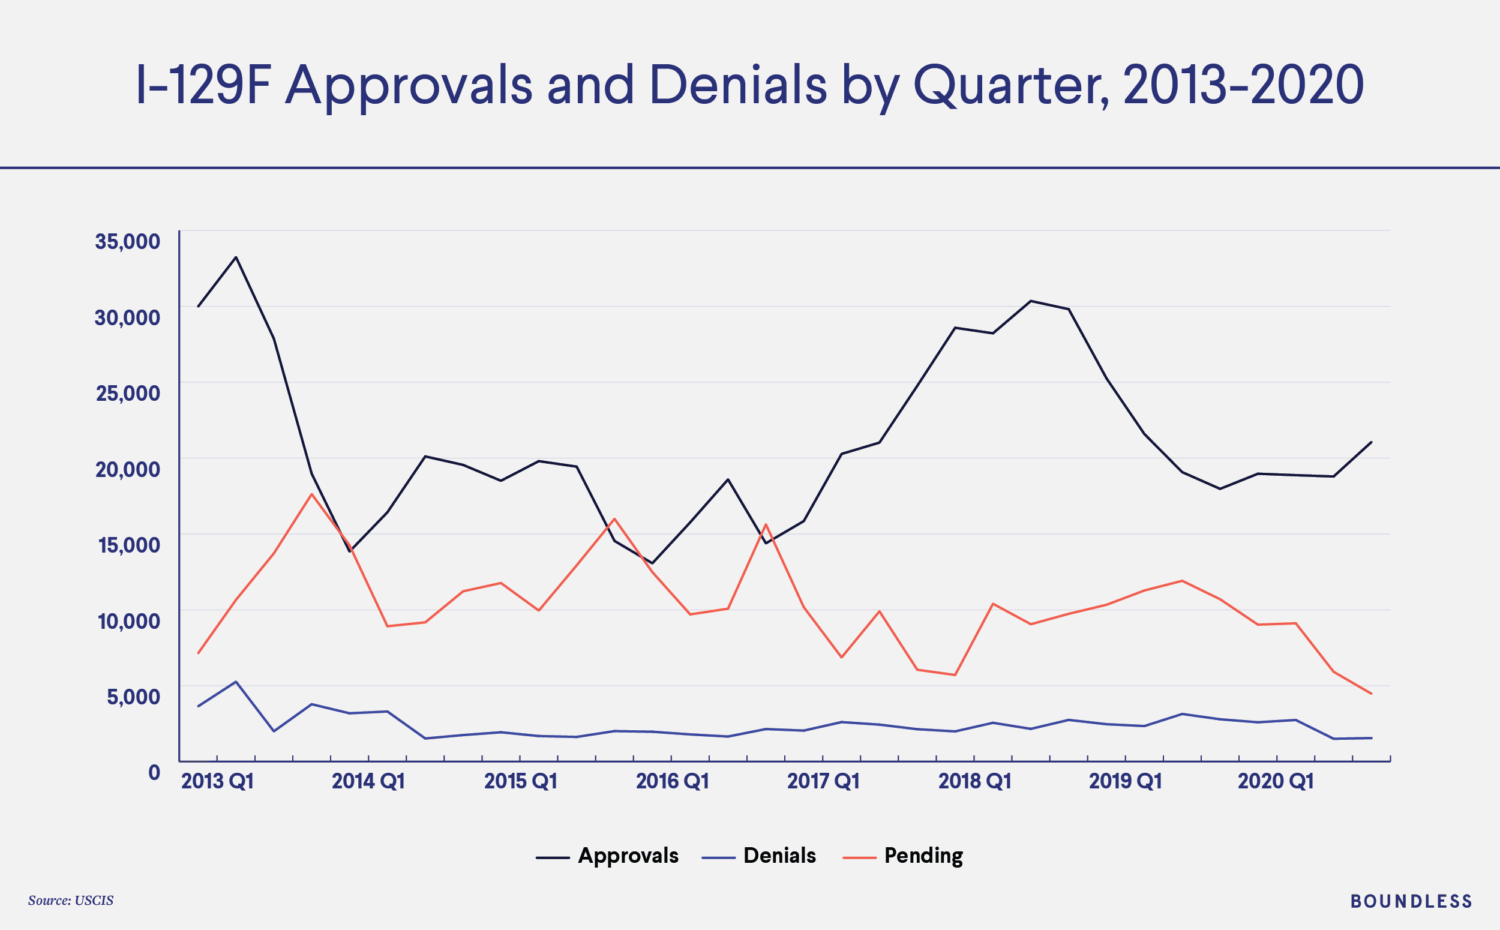 K-1 Approvals and Denials